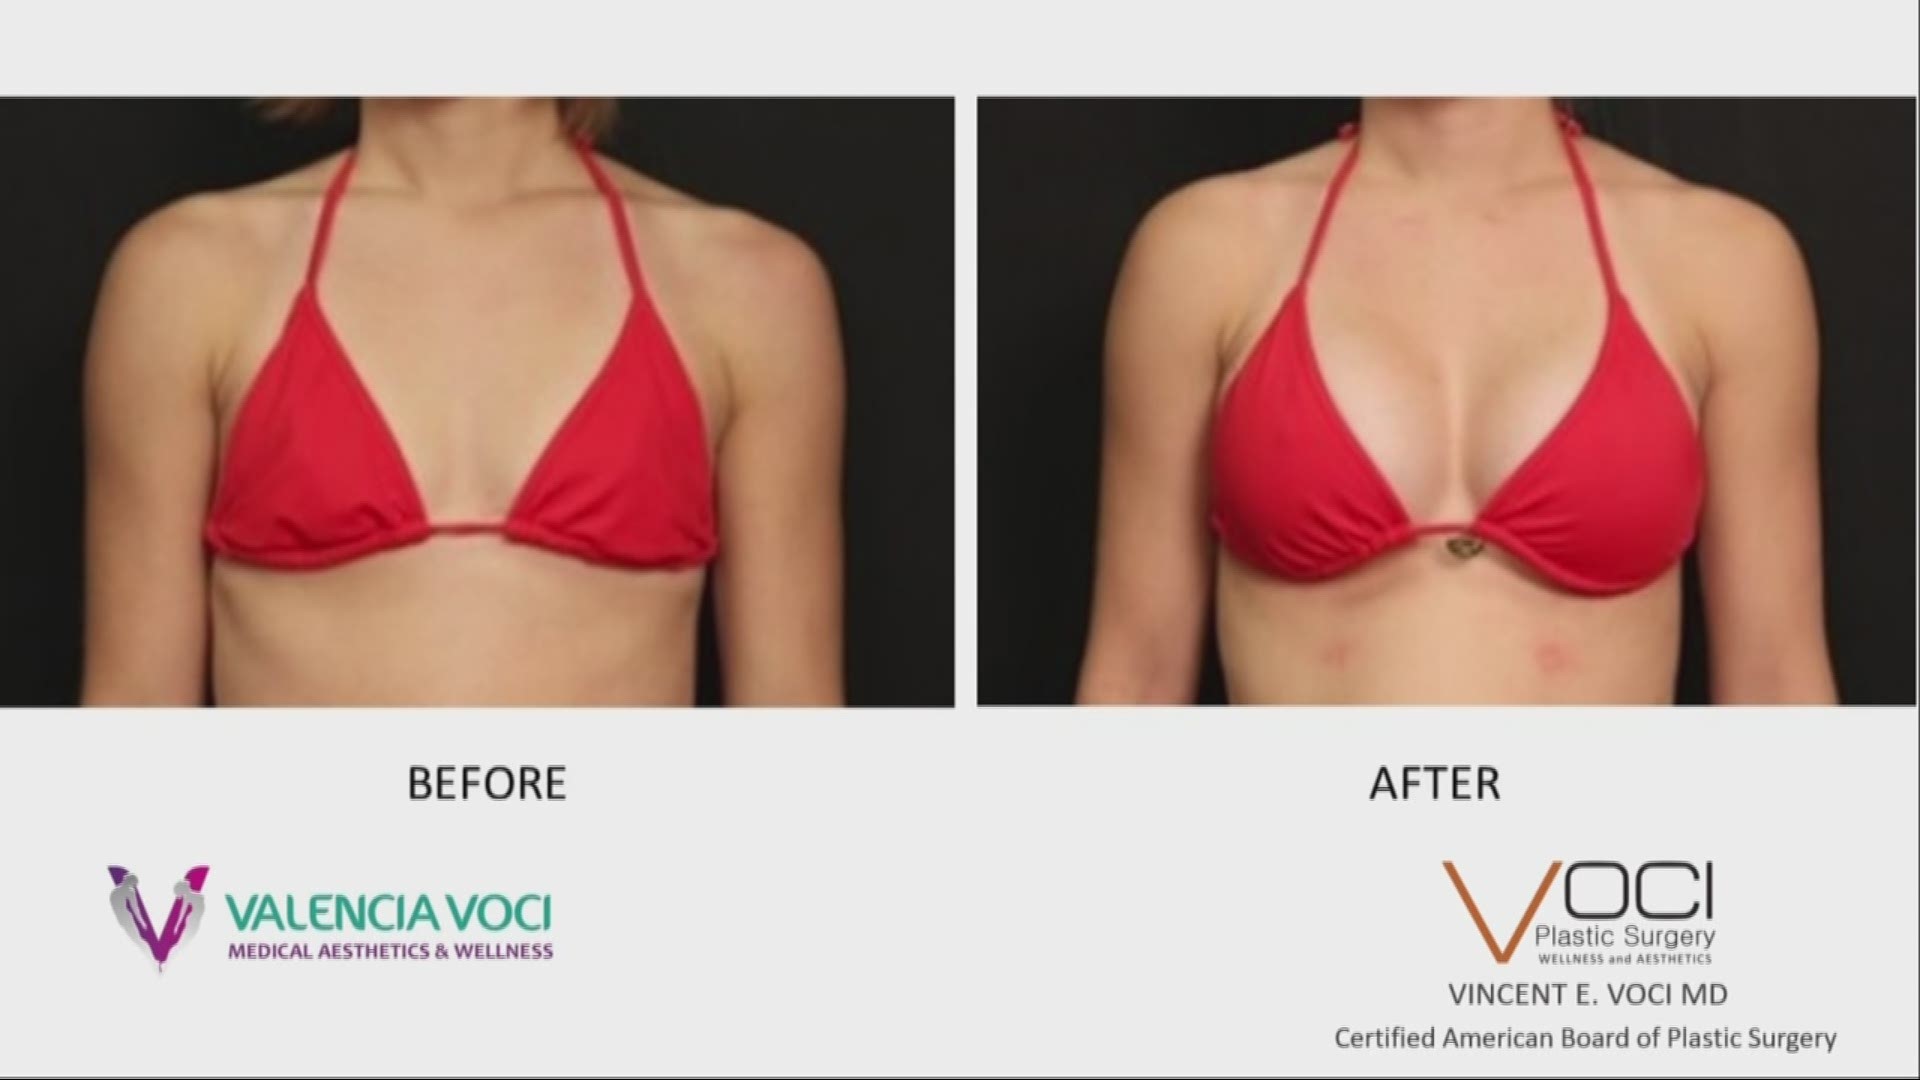 Dr. Vincent Voci talks about why women get cosmetic surgery like breast augmentation and how to choose the right options.